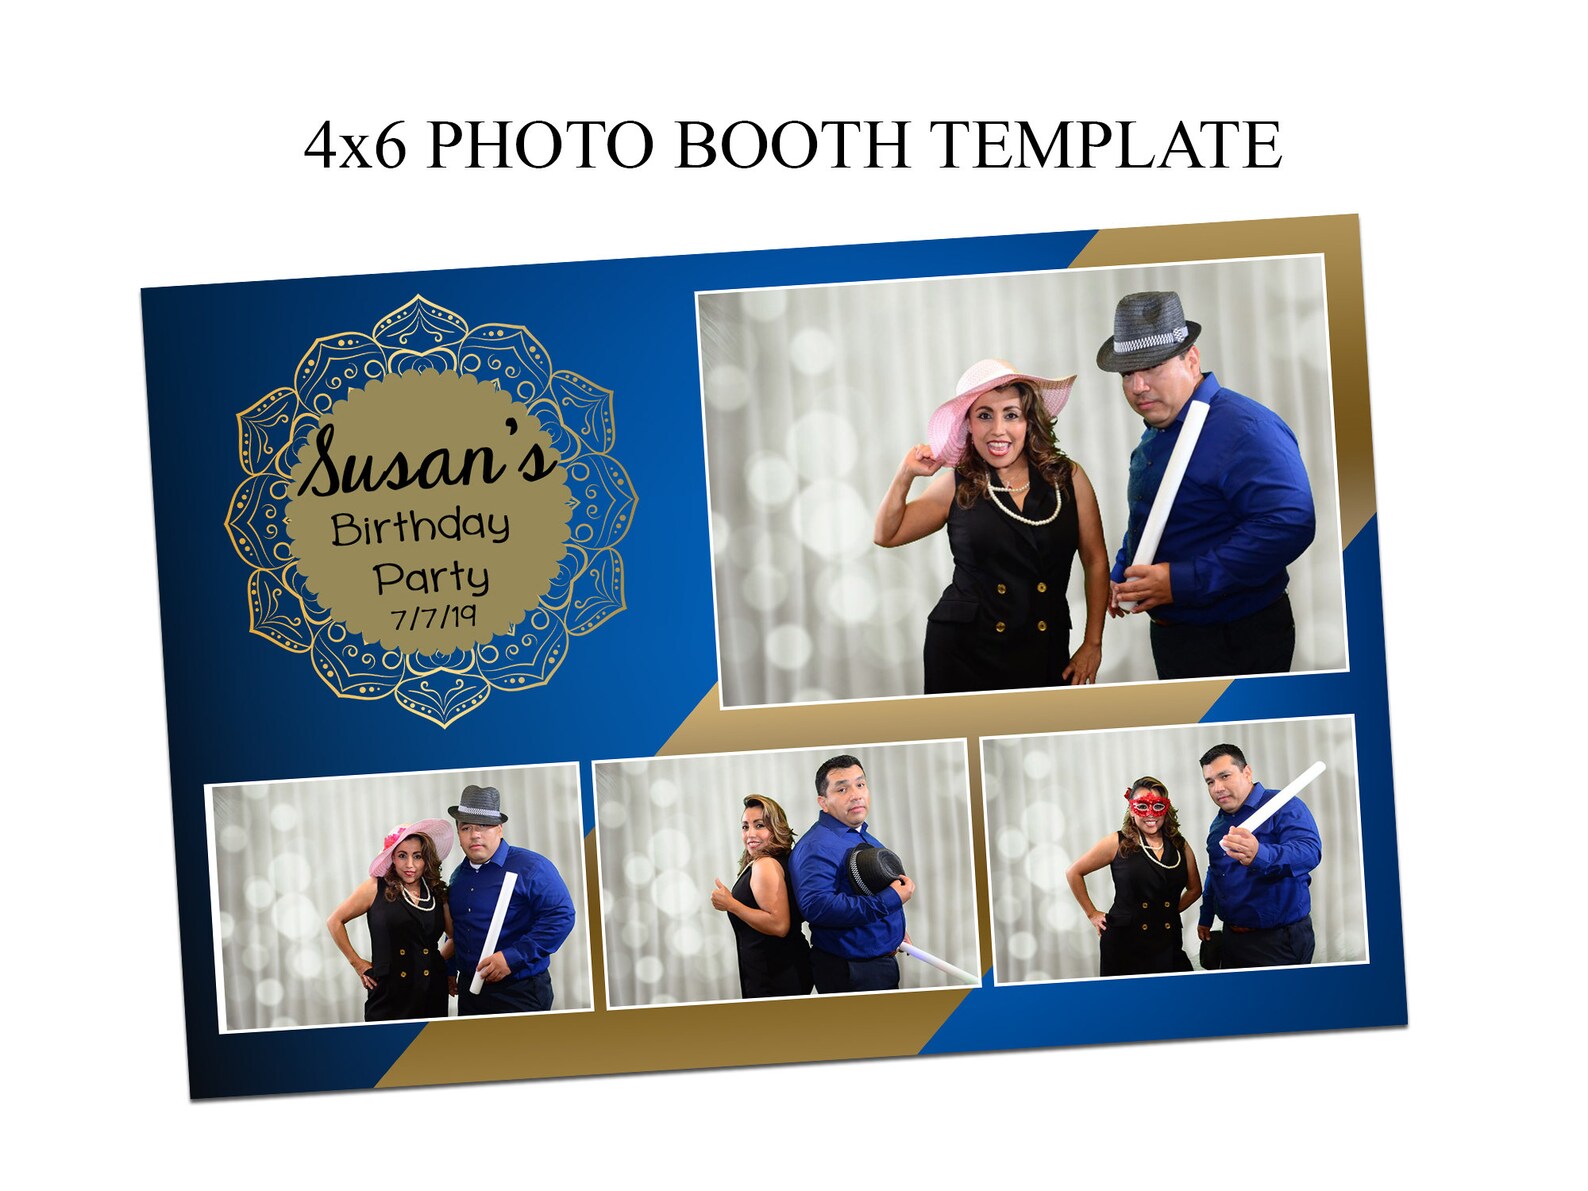 photo-booth-template-4x6-wedding-photo-booth-template-xv-etsy